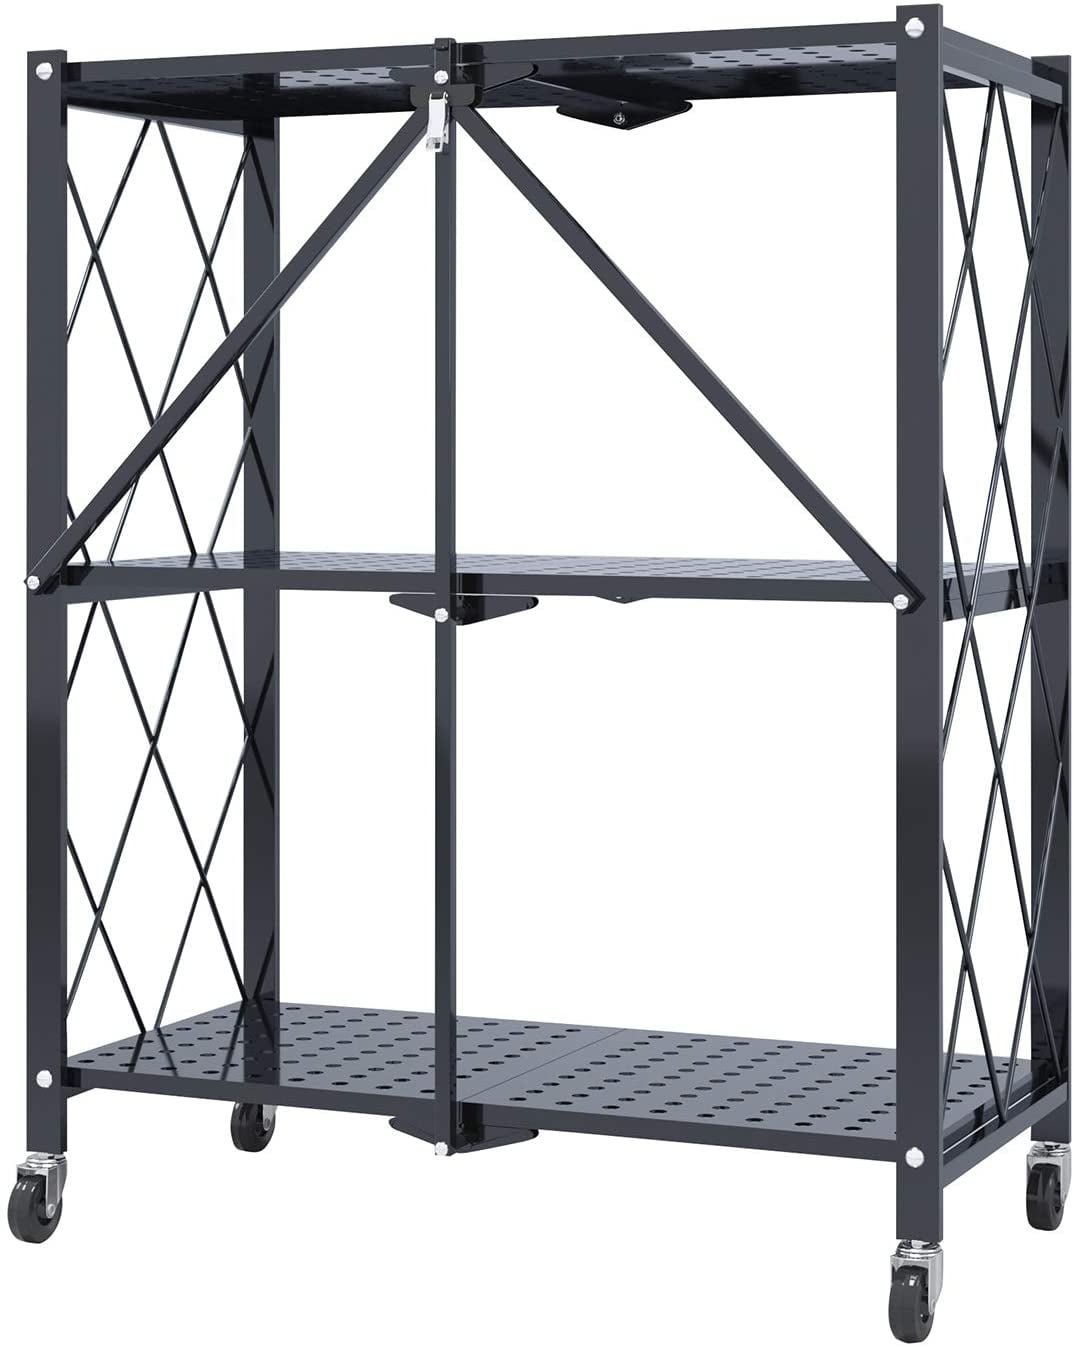 Soges 3-Tier Foldable Metal Storage Shelf Rolling Rack with Wheels Moving Utility Cart for Home Office Kitchen Garage， Black